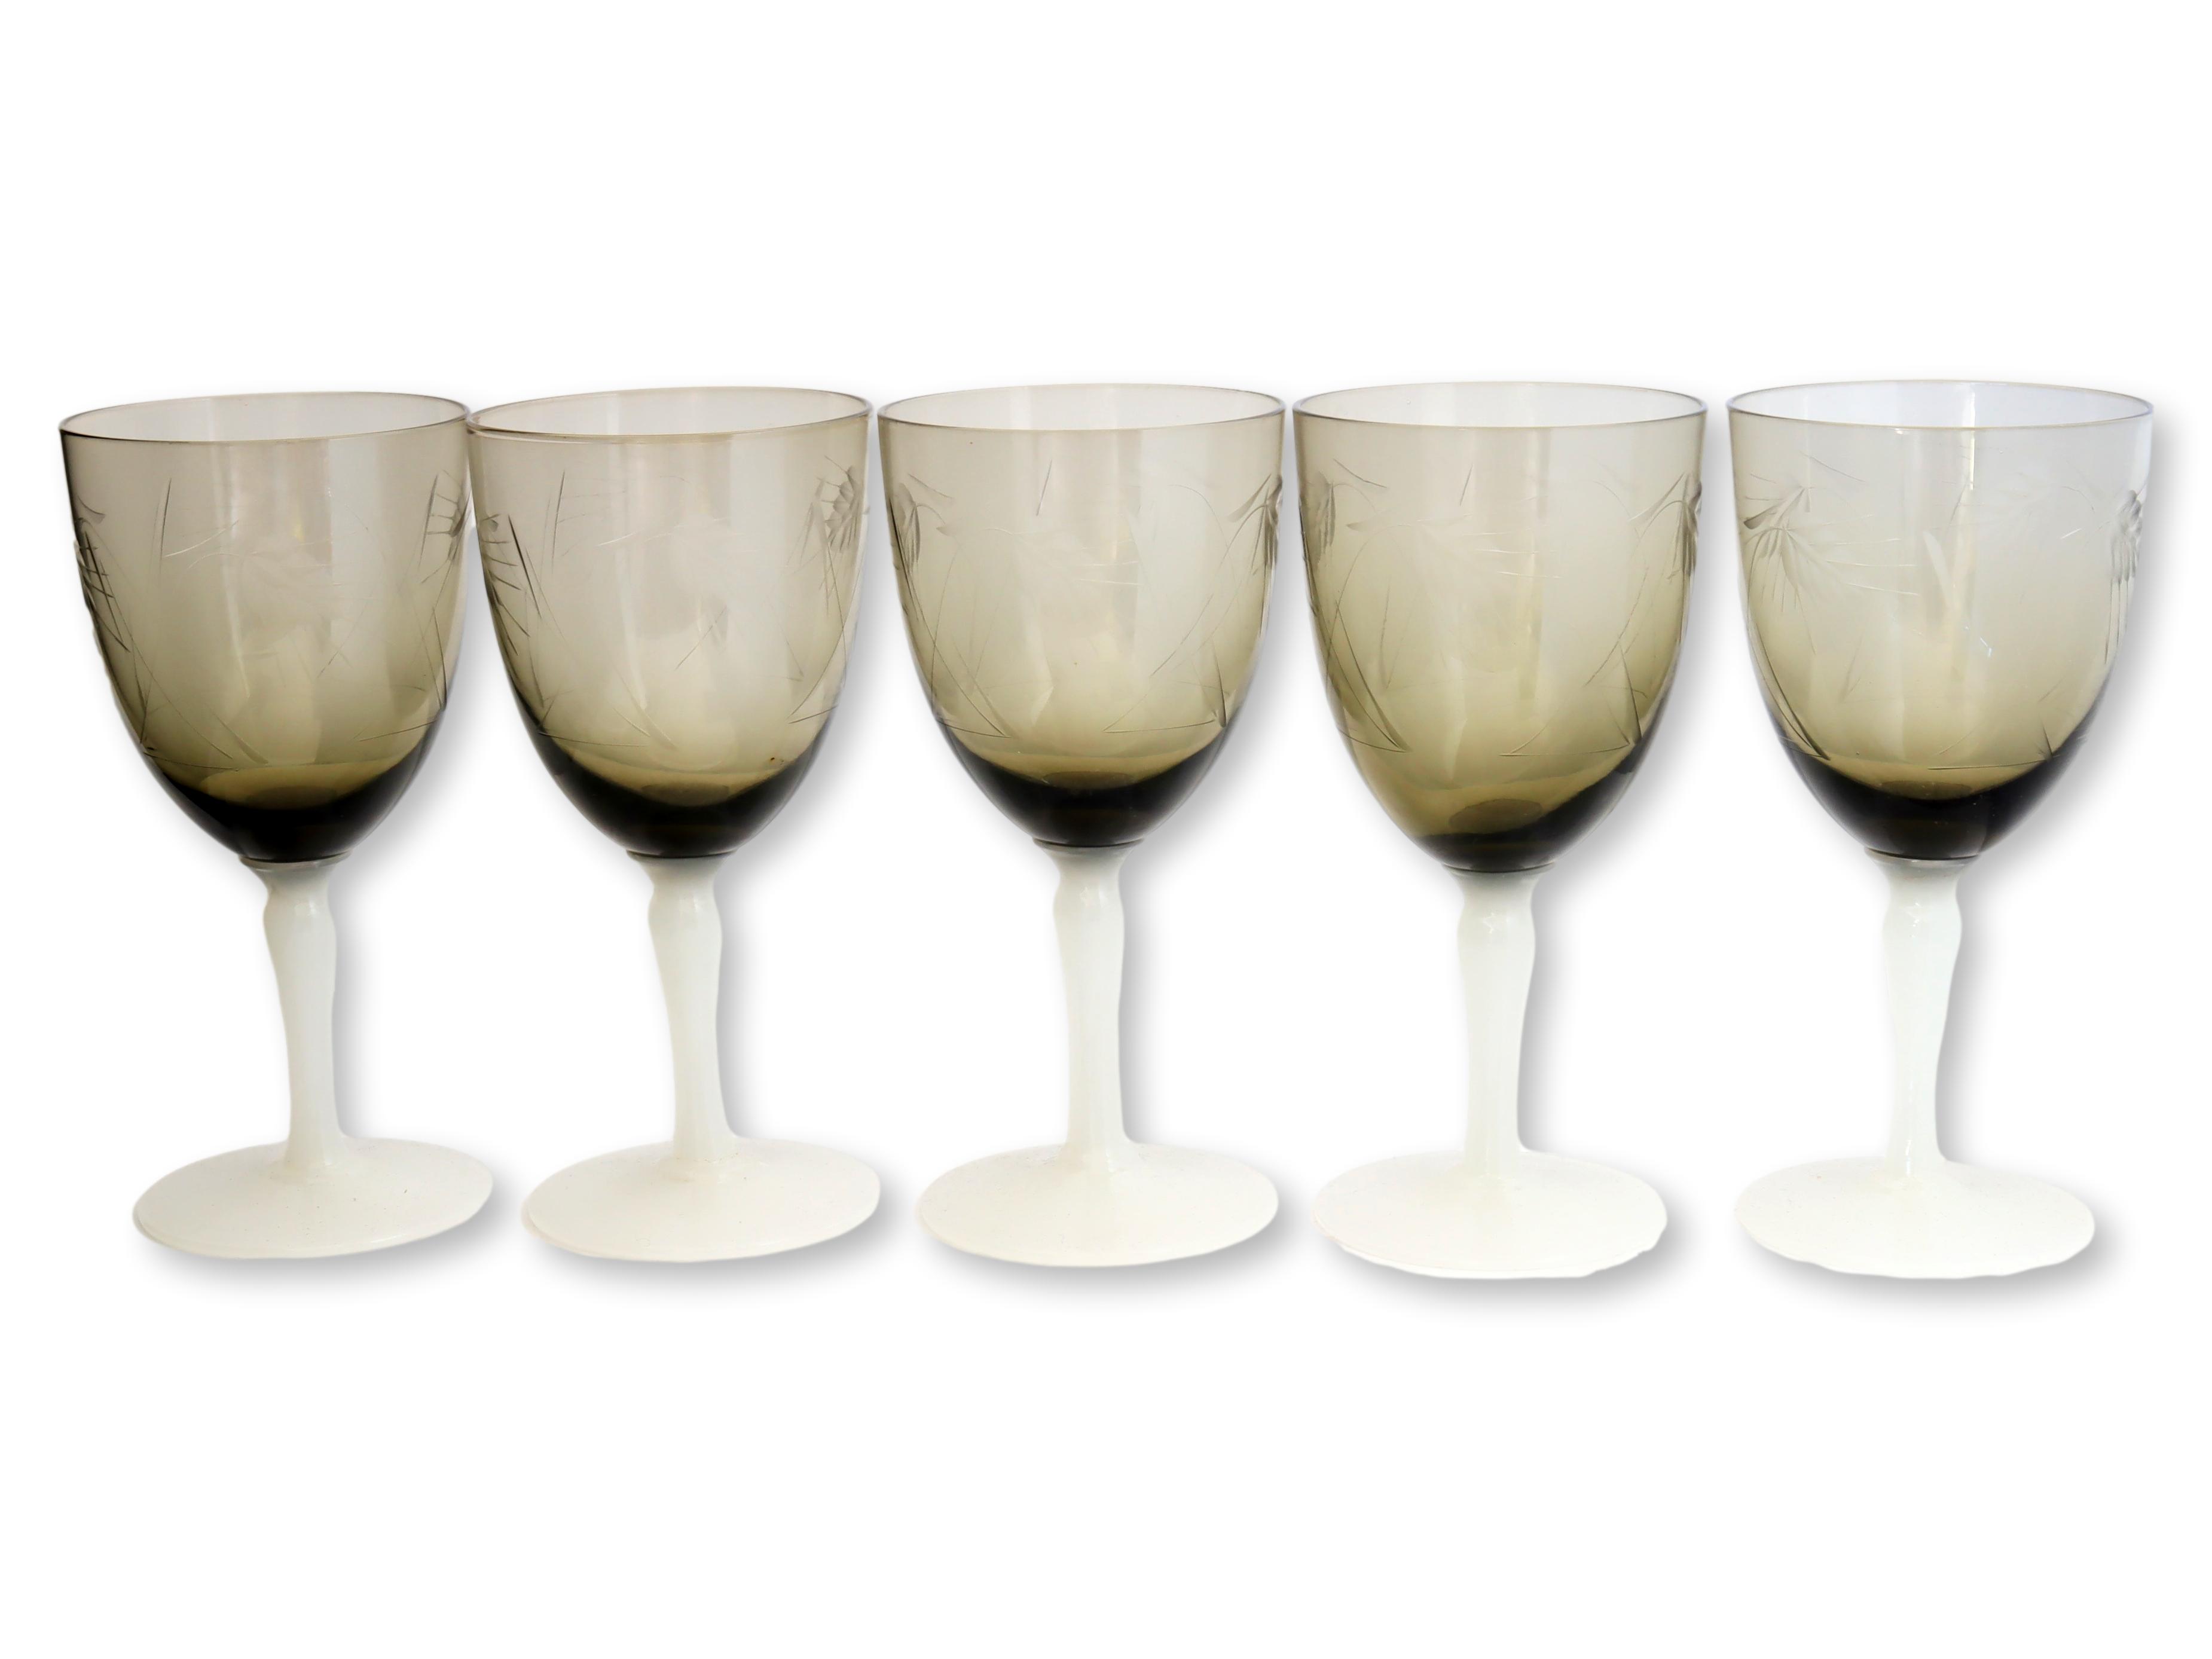 Smokey Etched Wine Glasses, S/5